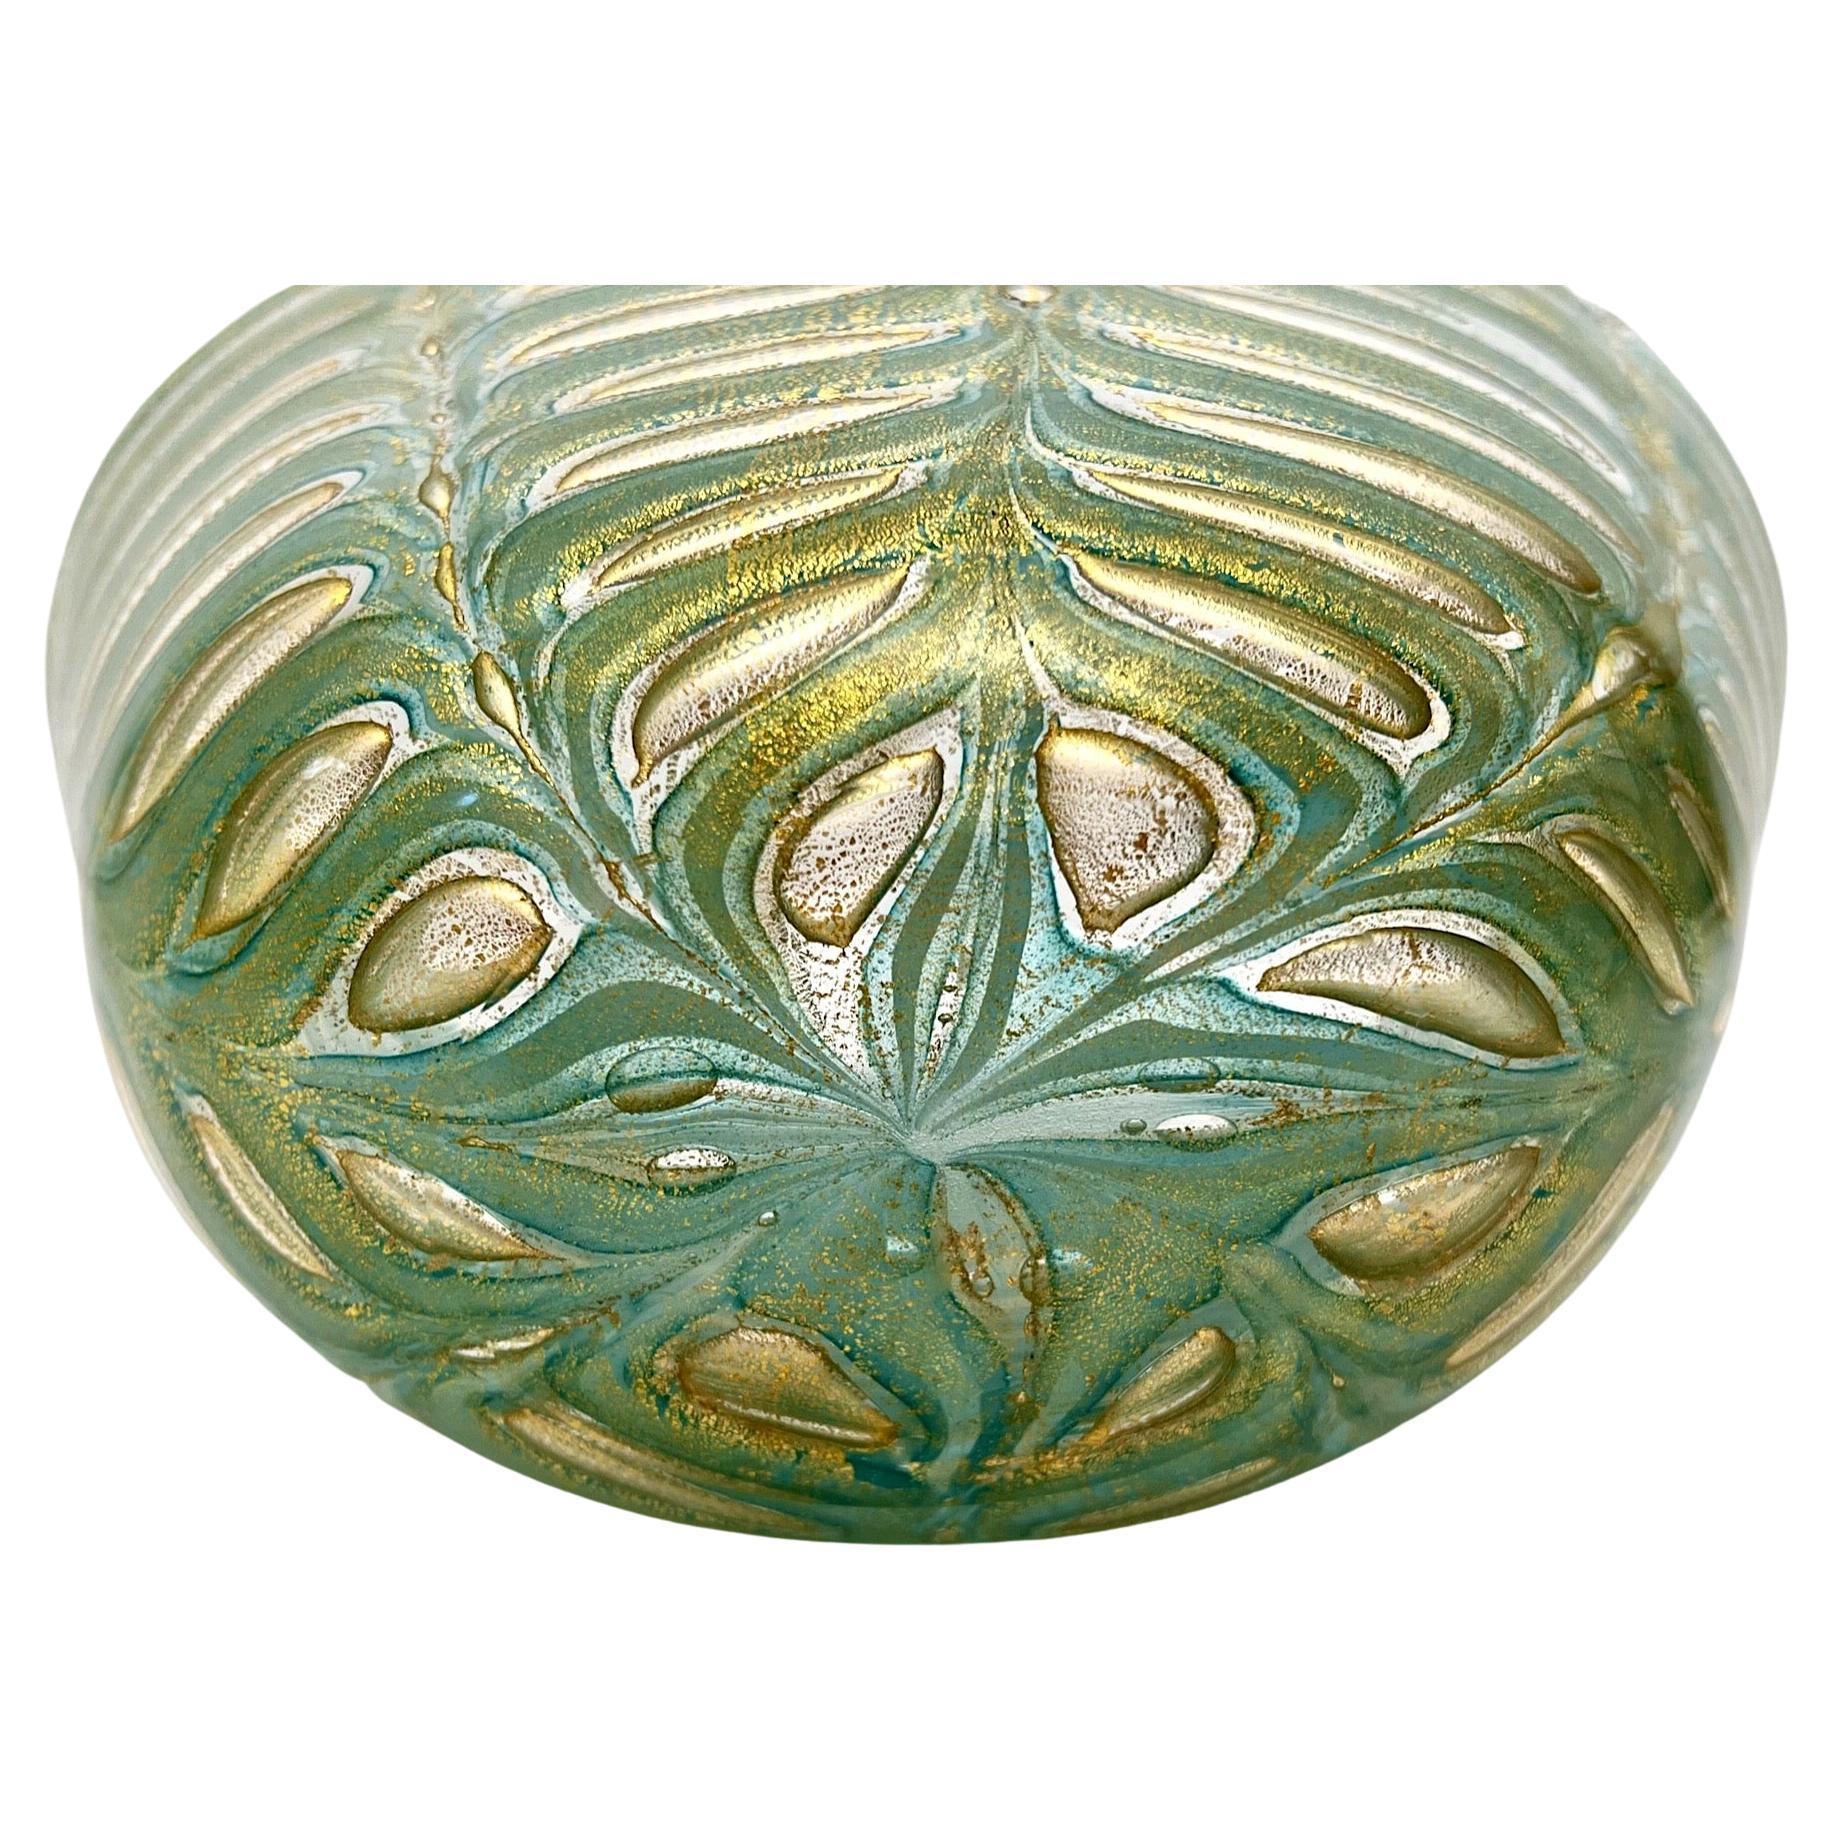 Ercole Barovier Murano Green and Gold Leaf Graffito Bowl For Sale 2